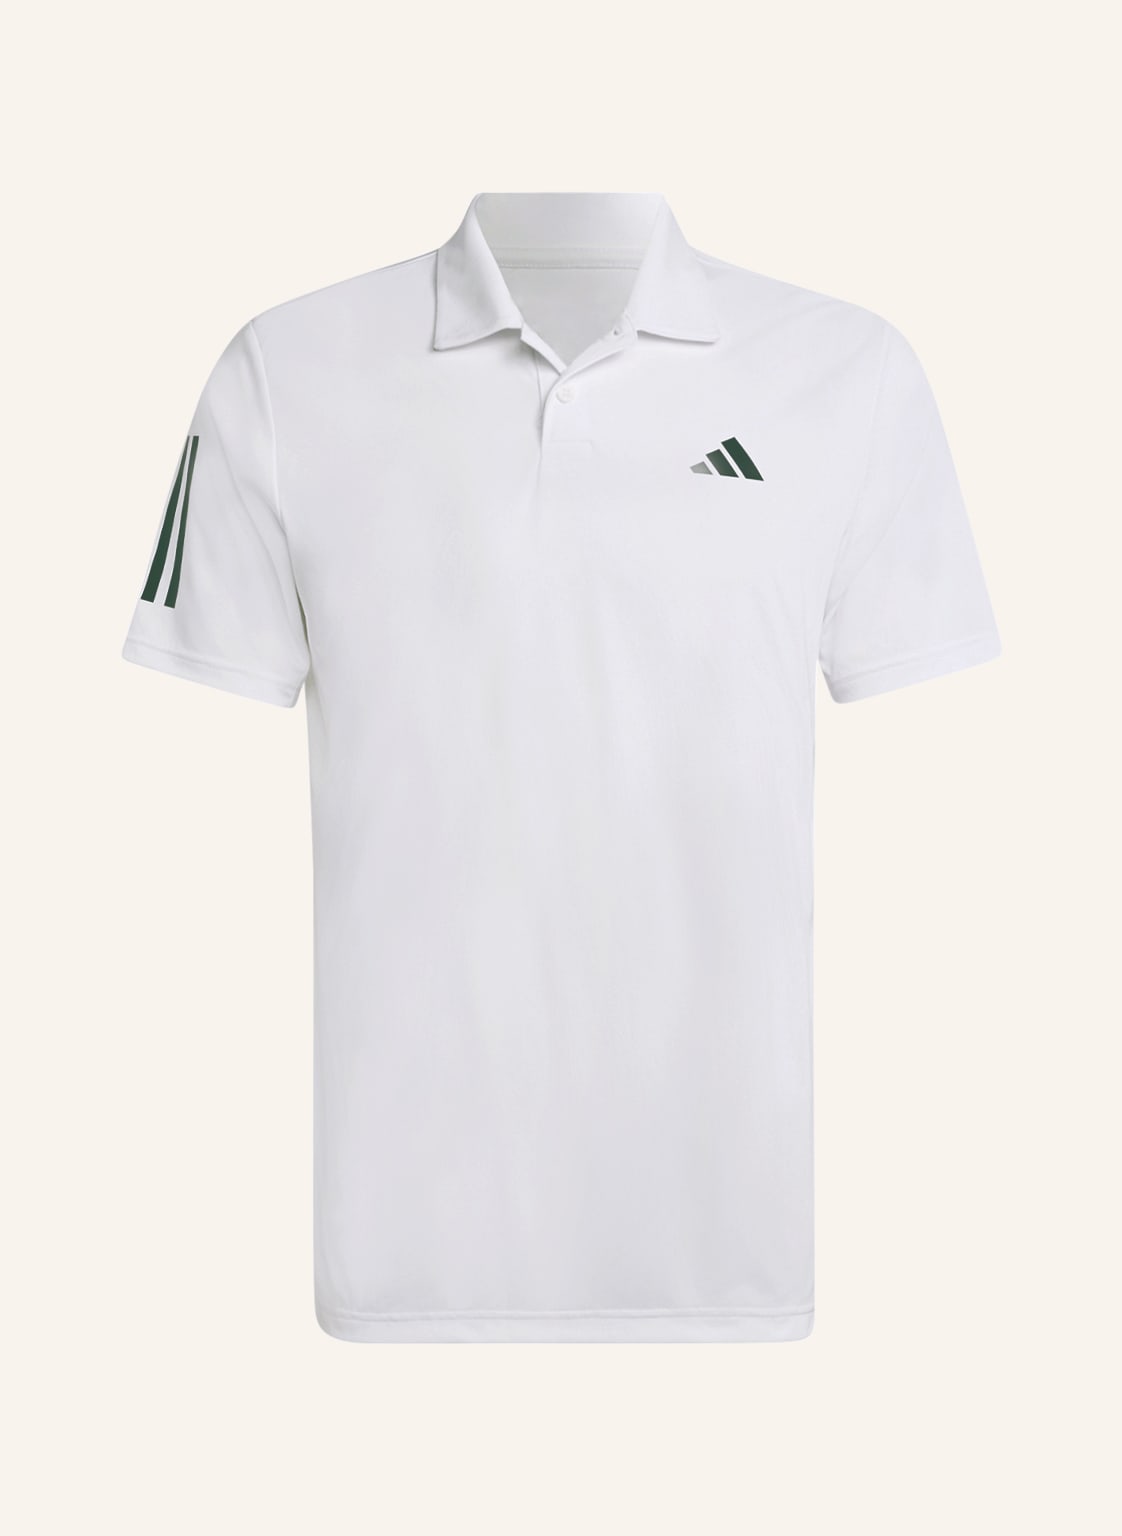 Image of Adidas Funktions-Poloshirt Club Mit Mesh weiss